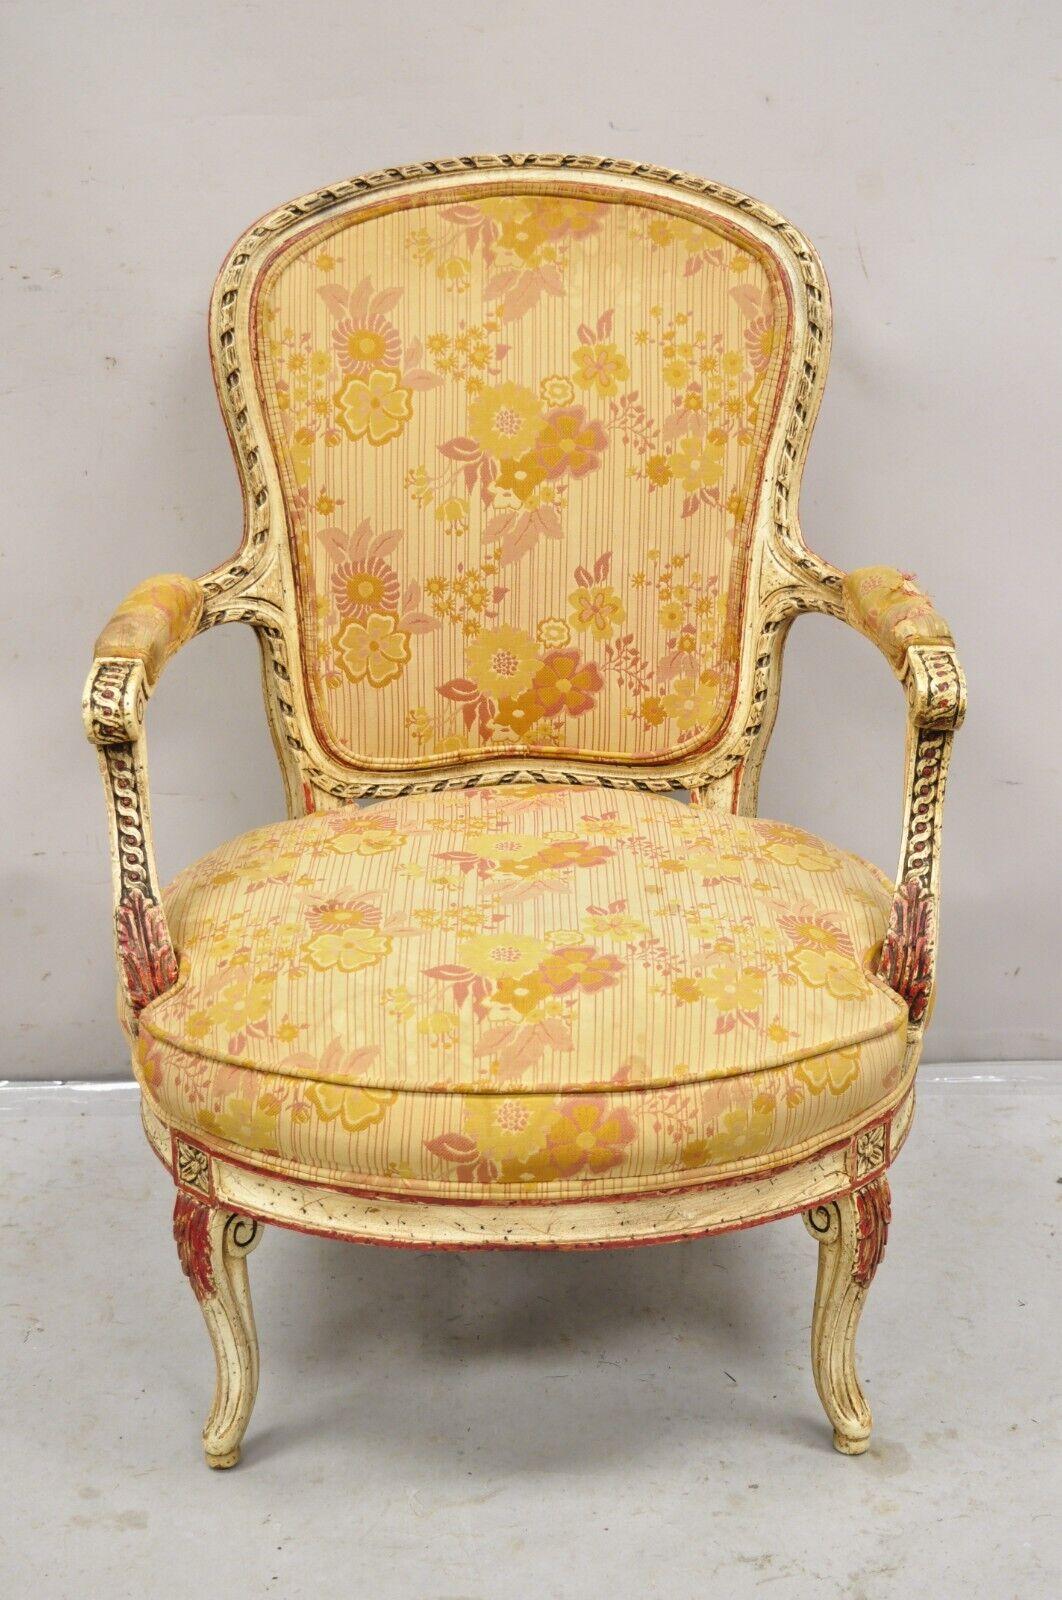 Vintage French Louis XV Style Cream and Red Painted Low Seat Boudoir Fauteuil Arm Chair. Circa Mid 20th Century.
Measurements: 35